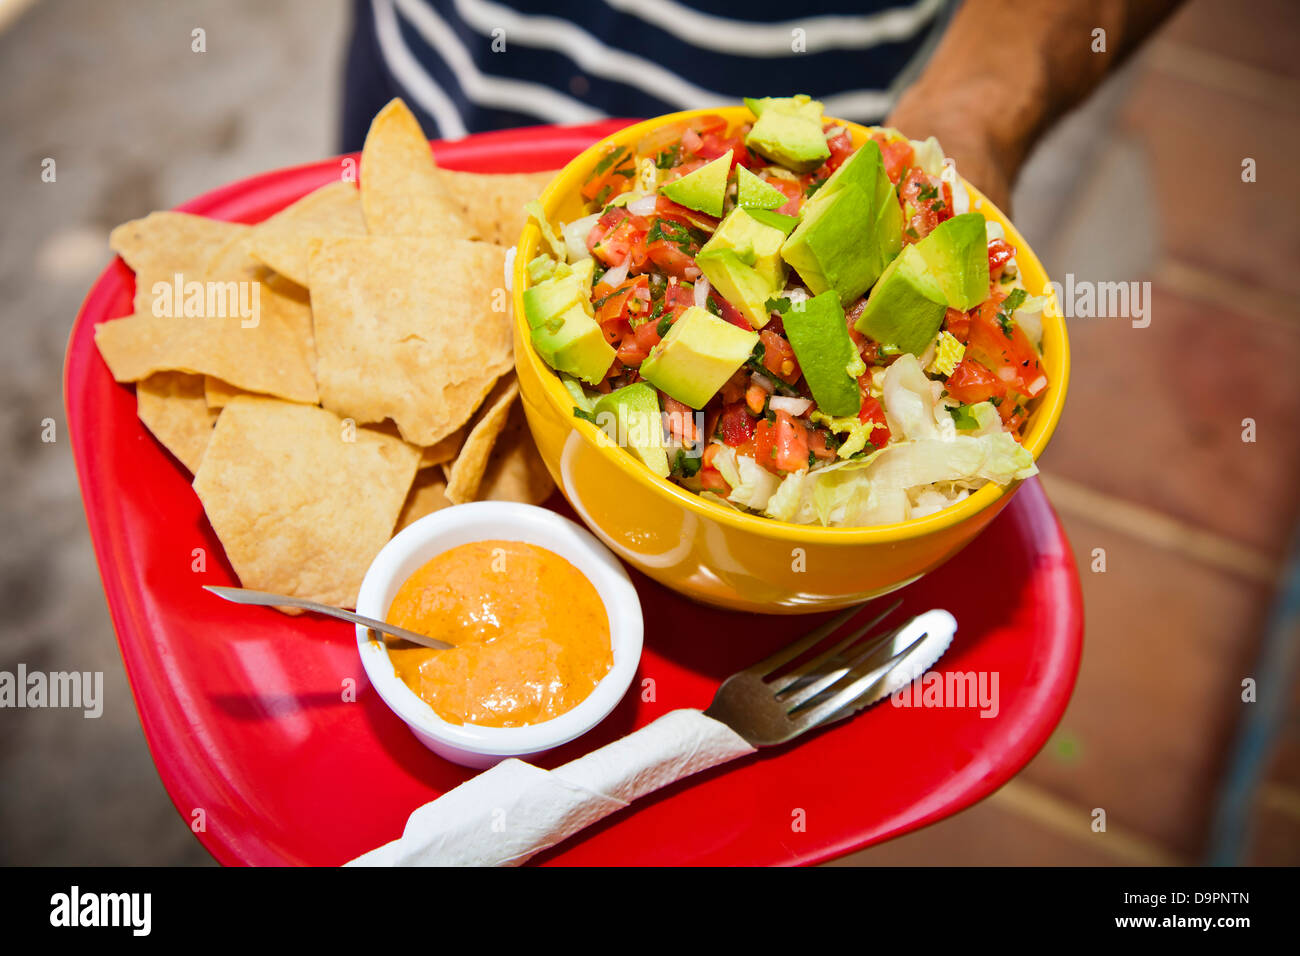 Hand holding serving of mexican food Stock Photo